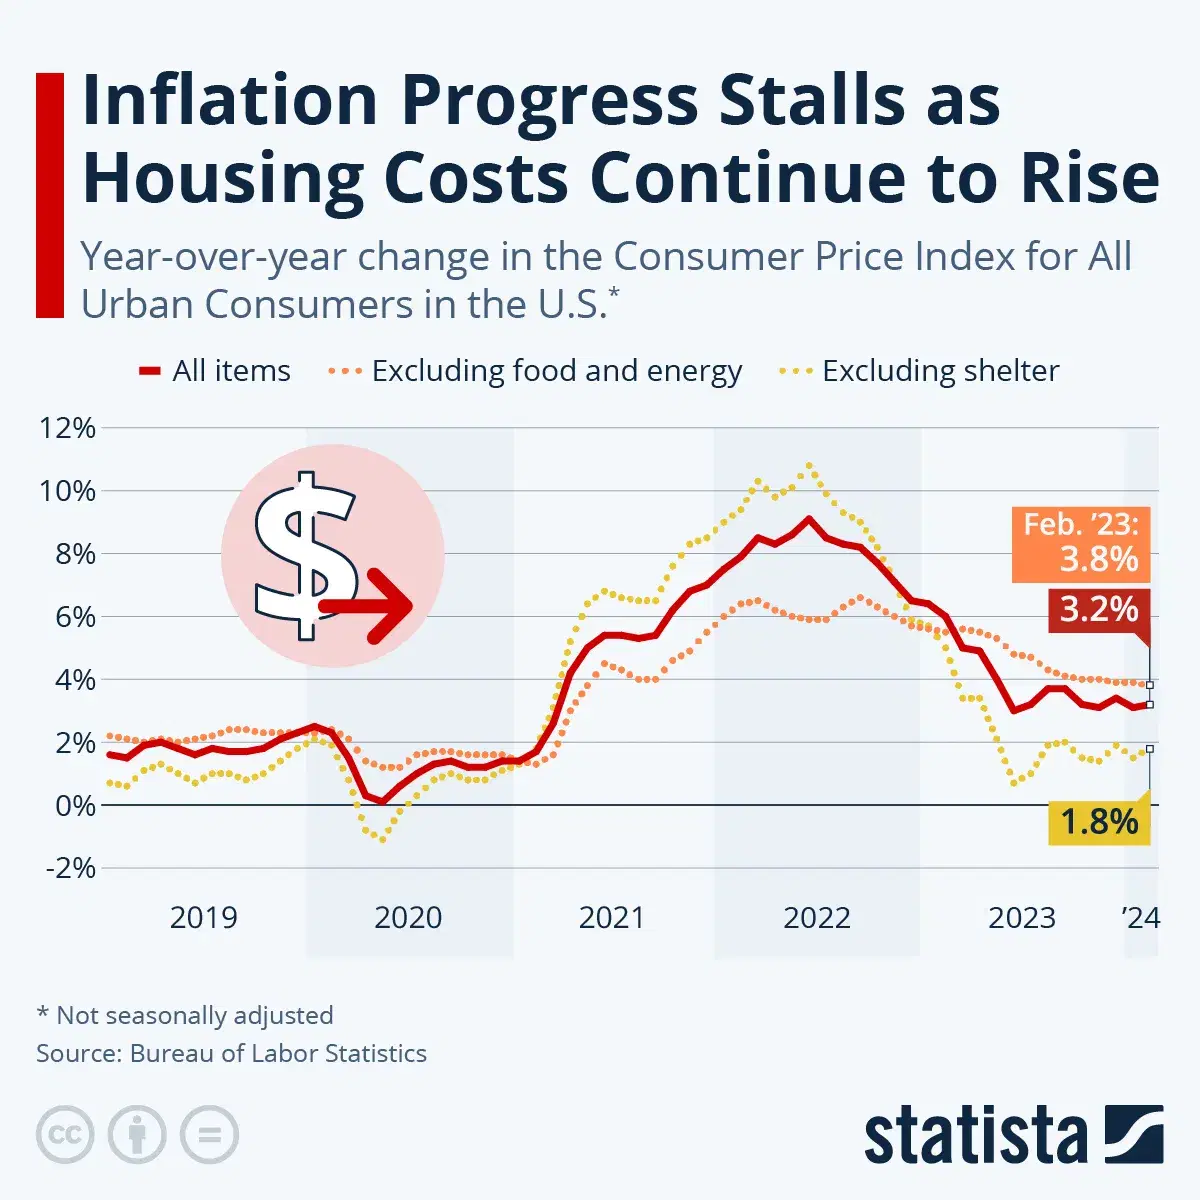 Inflation Progress Stalls as Housing Costs Continue to Rise